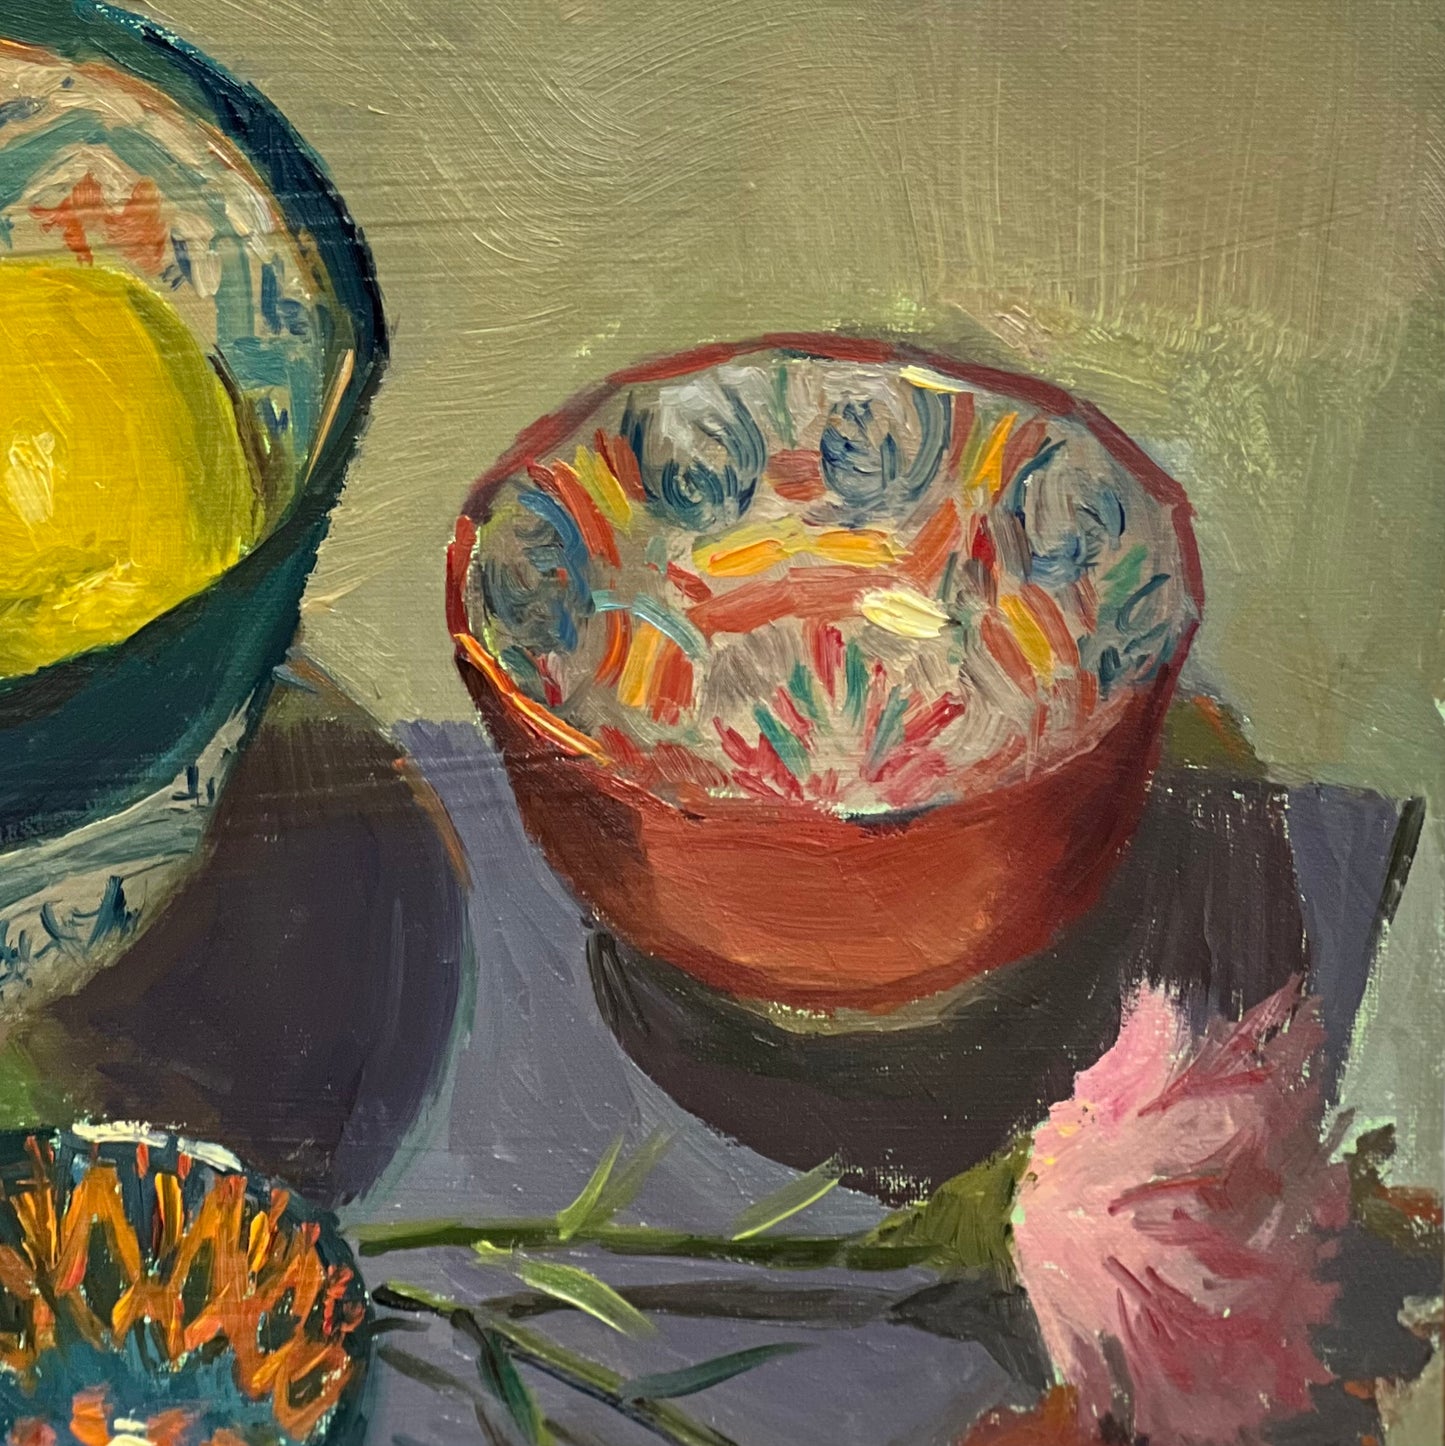 Birds Eye view of bowls and lemons - Still Life Oil Painting